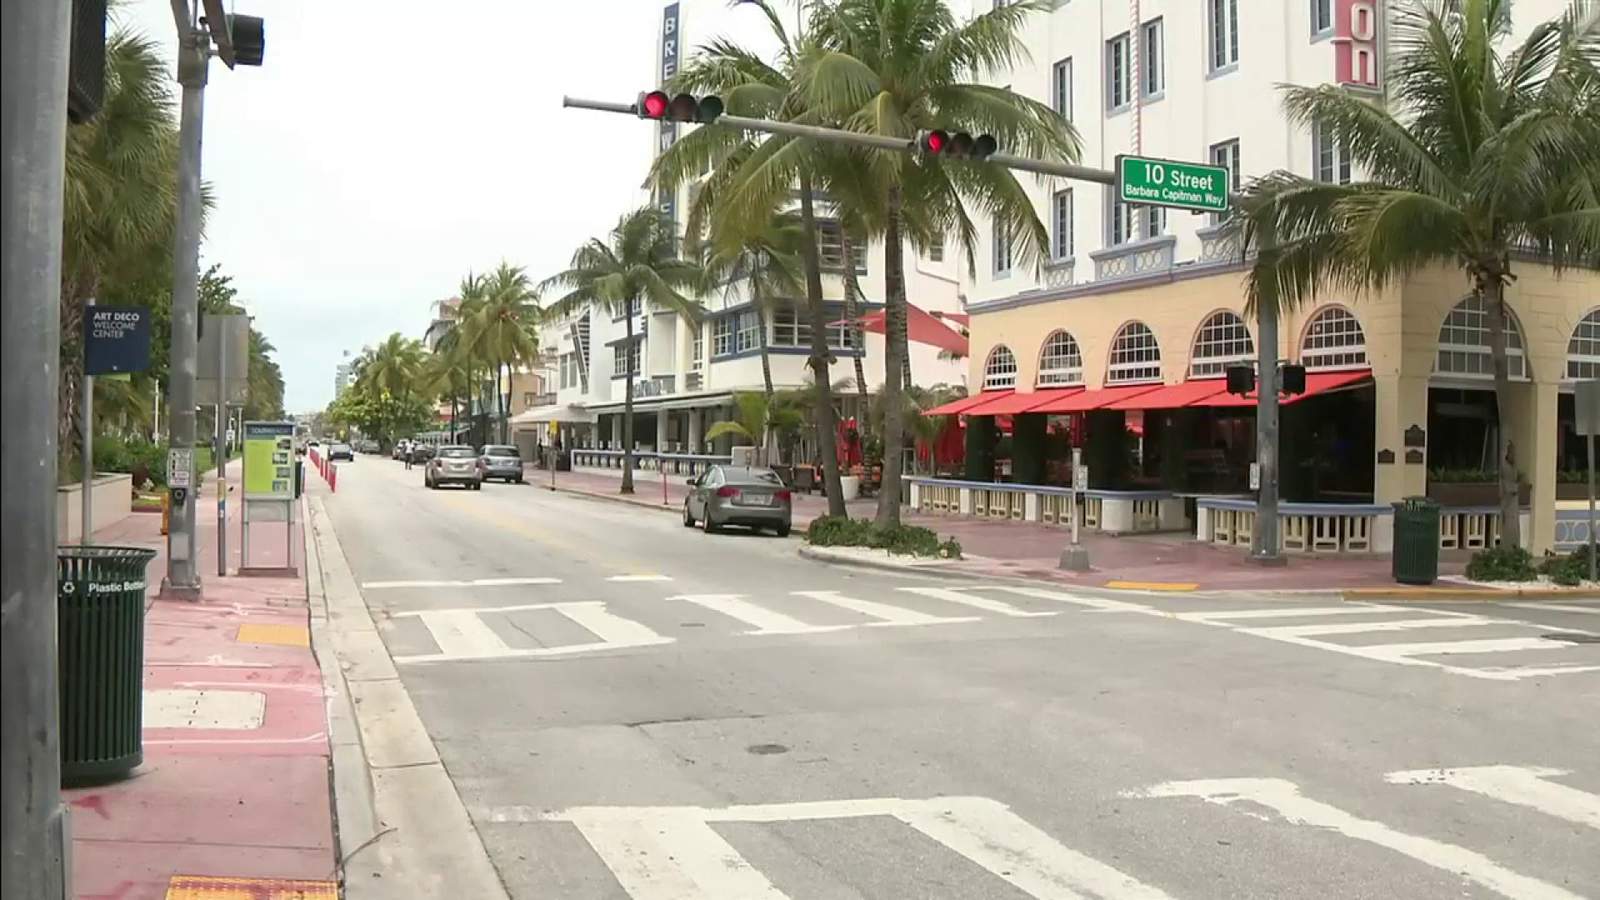 Not everyone happy about no car traffic on Ocean Drive